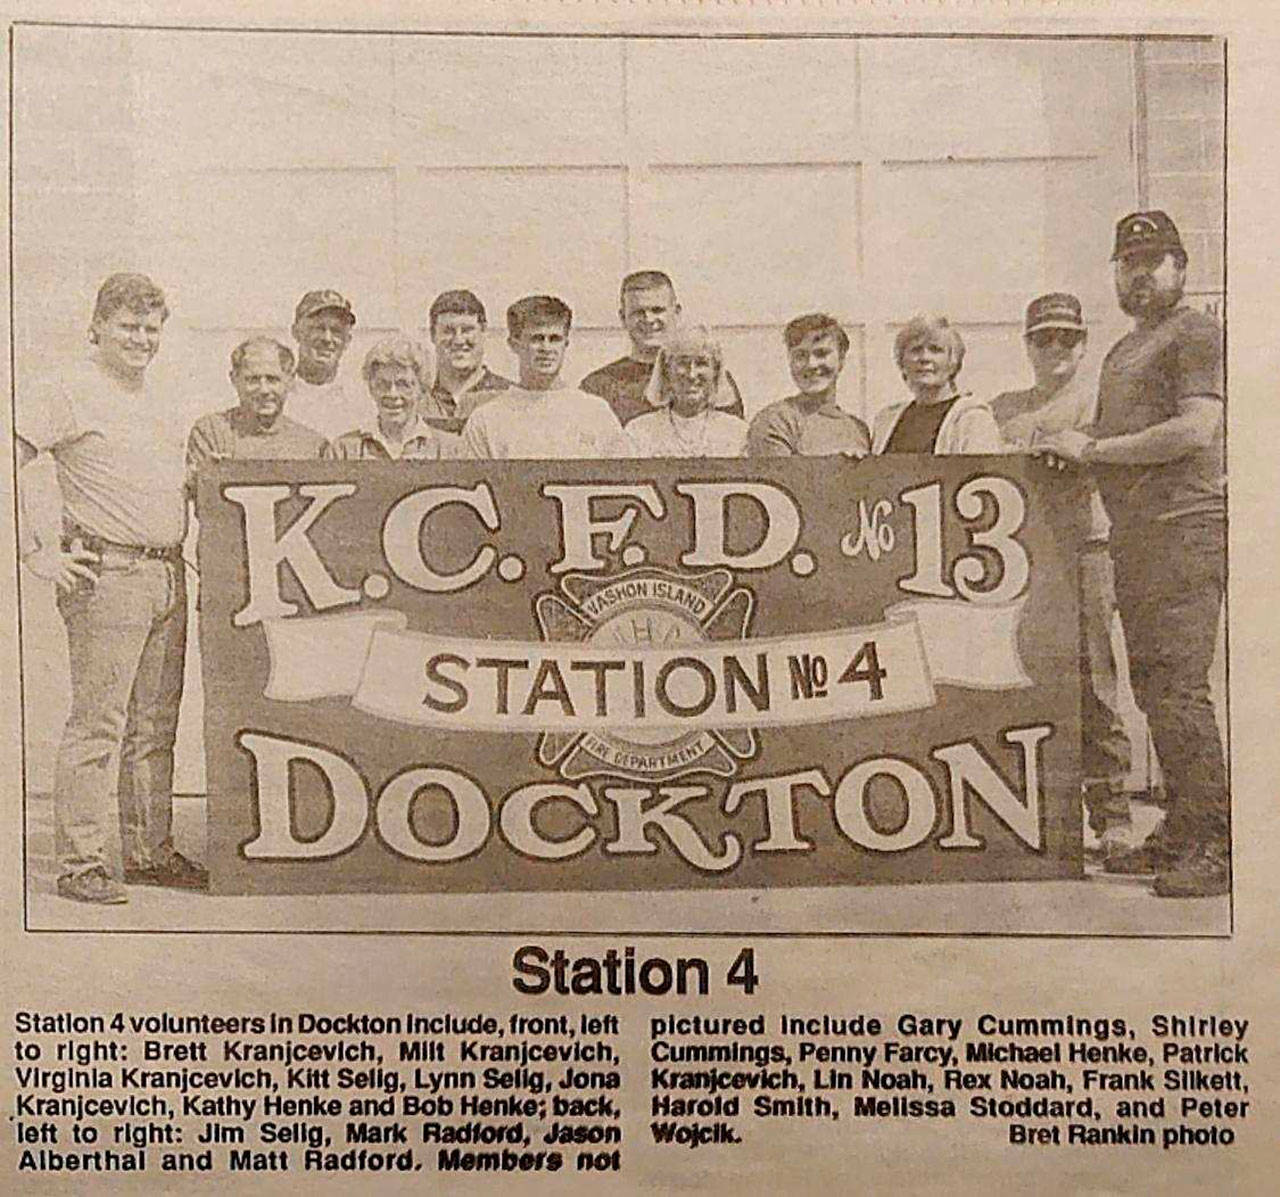 A 1992 newspaper clipping, picturing those who then served at the Dockton Fire Station. Brett Kranjcevich (far left) is there, along with his father, mother, wife, and many other relatives in the Kranjcevich and Henke families (Courtesy Photo).